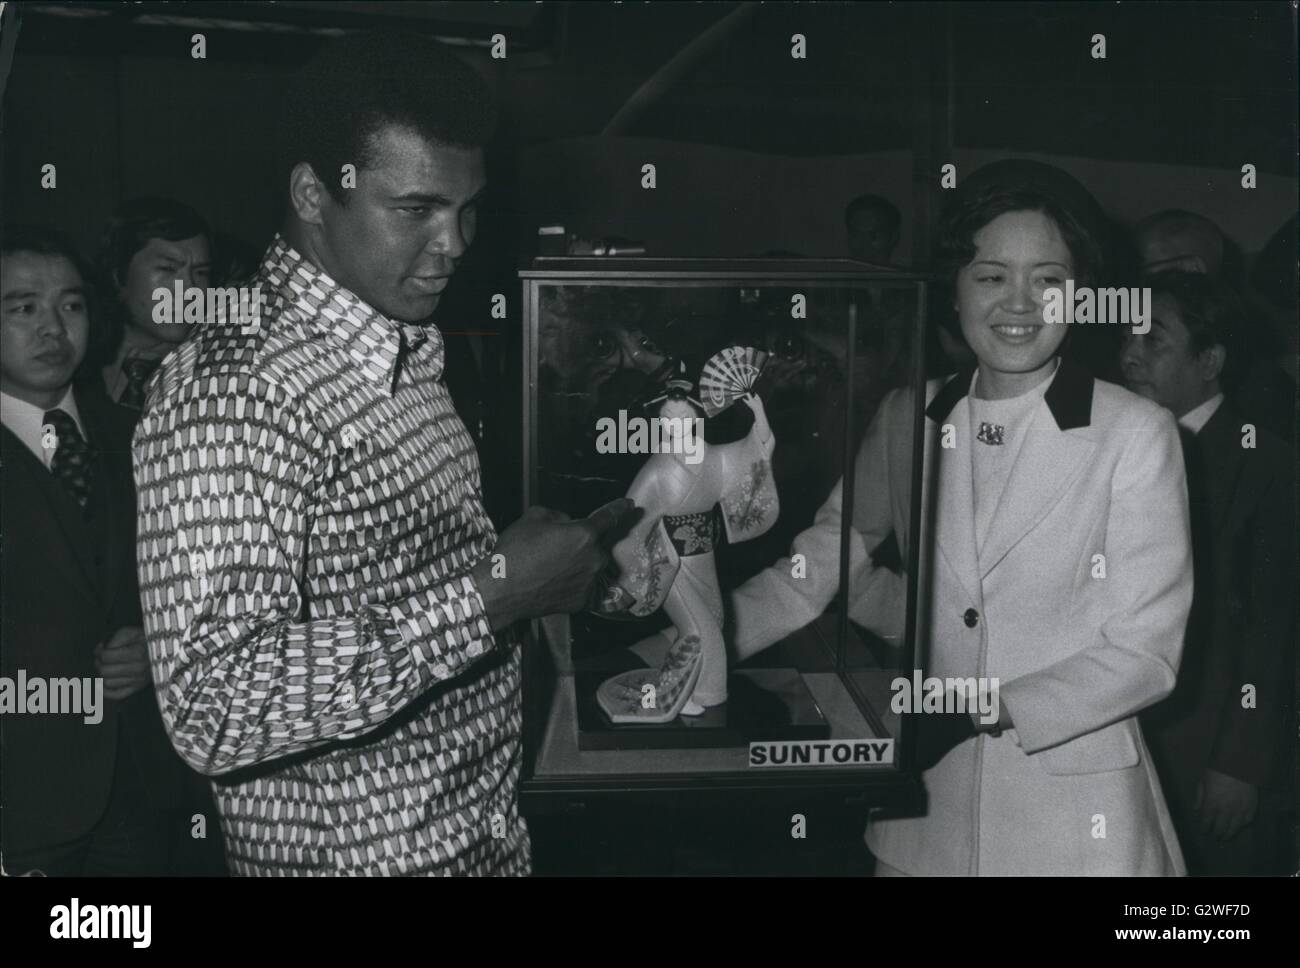 All Gets Japanese Doll. 24th Mar, 1972. Former World Heavyweight: champion Muhammad Ali, who is in Tokyo to fight Mac Foster in a 15-round bout on April 1st, receives a Japanese doll as a souvenir during a reception given the two boxers at a Tokyo hotel. The souvenir Japanese doll, was given during a press reception given for the two boxers at a Tokyo hotel. it is Ali's first visit to Japan, but Mac Foster who is an ex-U.S.Marine, was stationed in Japan in 1963-64. Ali Vows to knock him out ''in the first five rounds'. © Keystone Press Agency/Keystone USA/ZUMA Wire/Alamy Live News Stock Photo